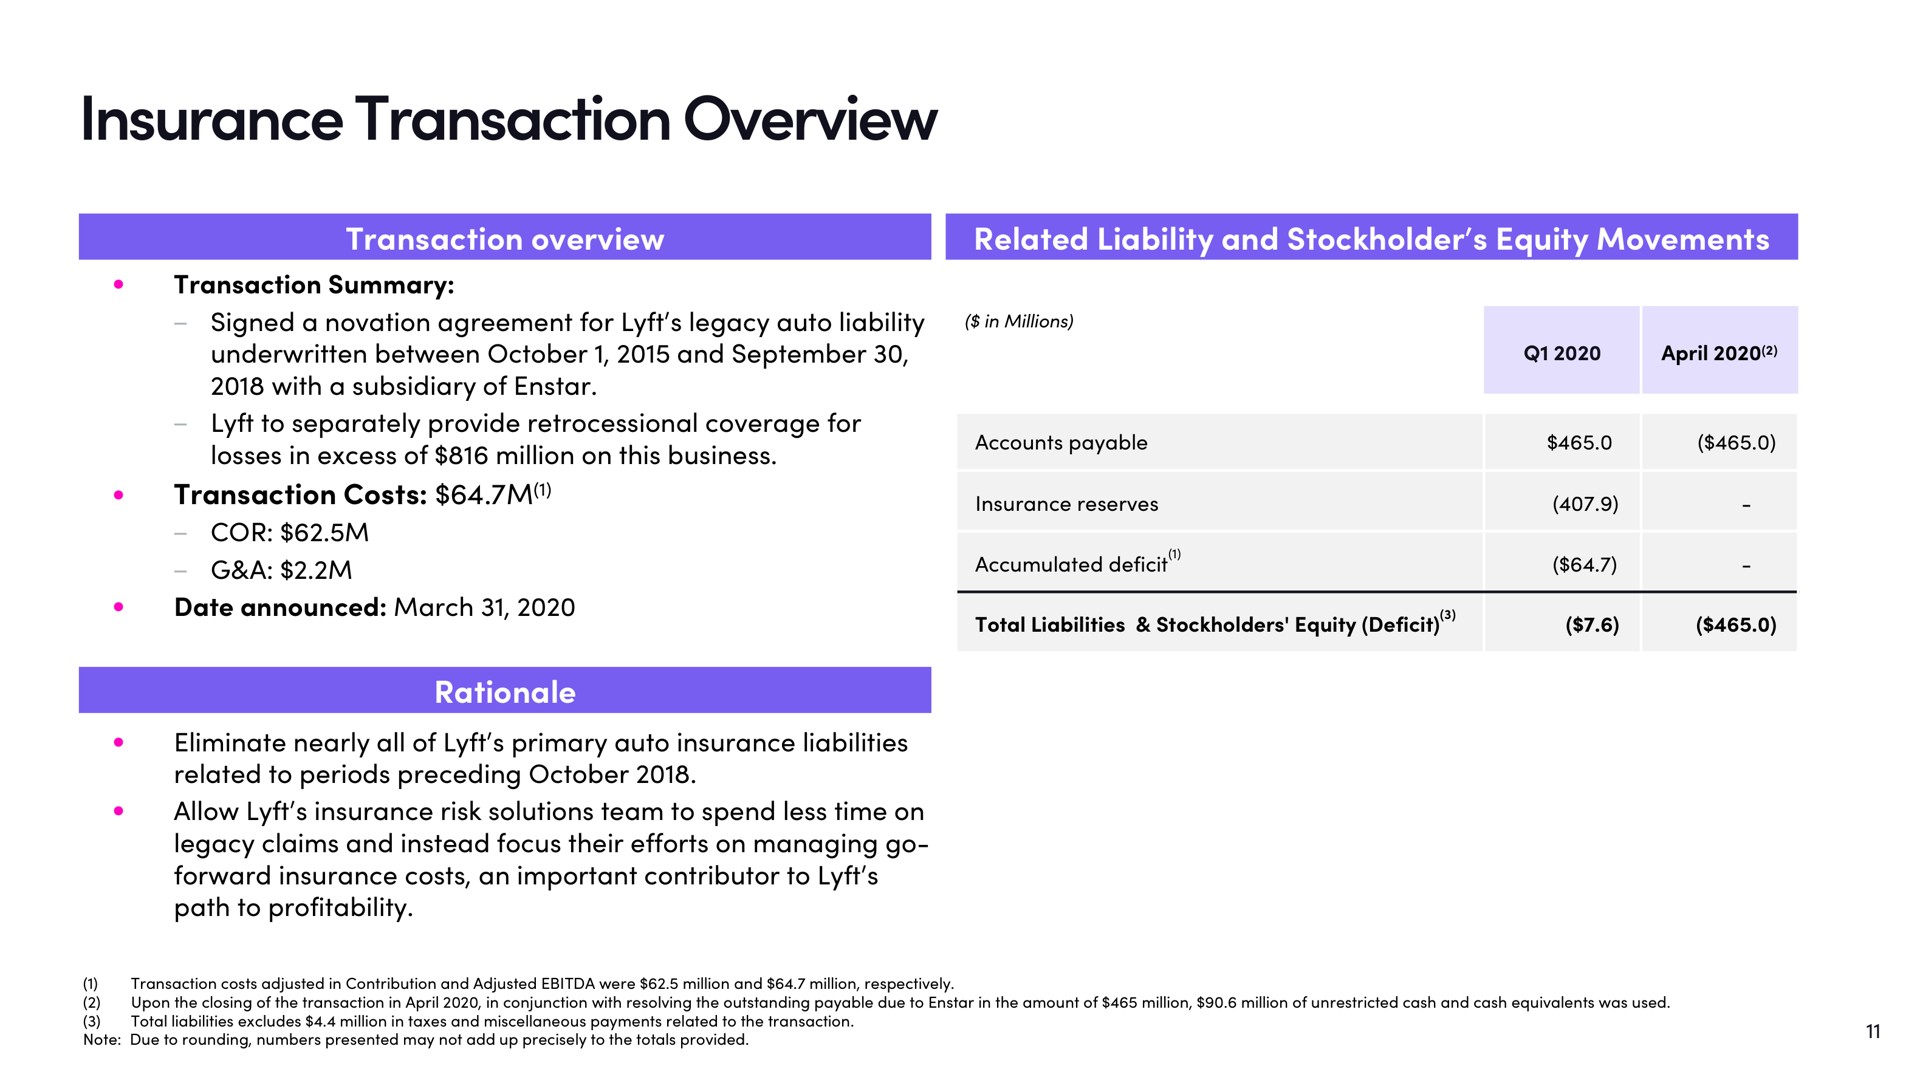 insurance transaction overview related liability and stockholder equity movements | Lyft